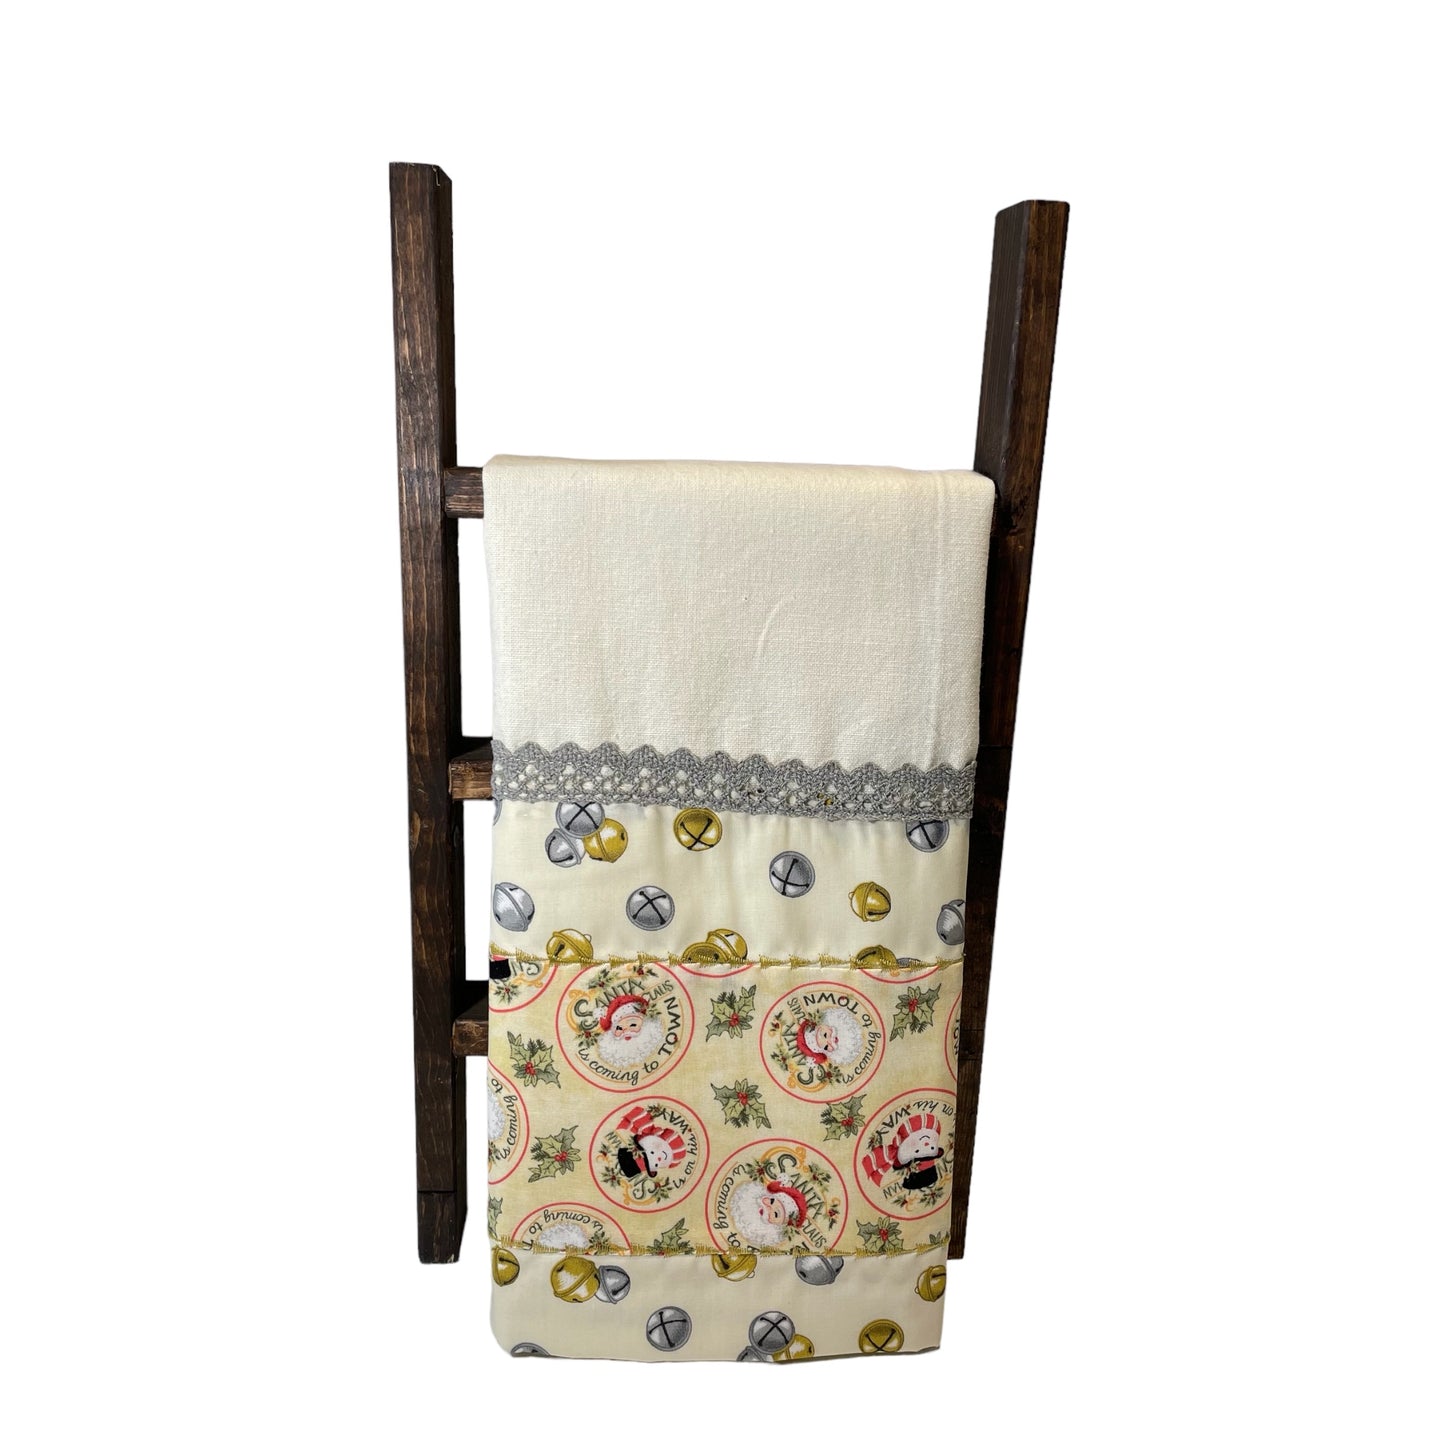 Charming Retro Santa Cream Cotton Dish Towel with Handcrafted Accents